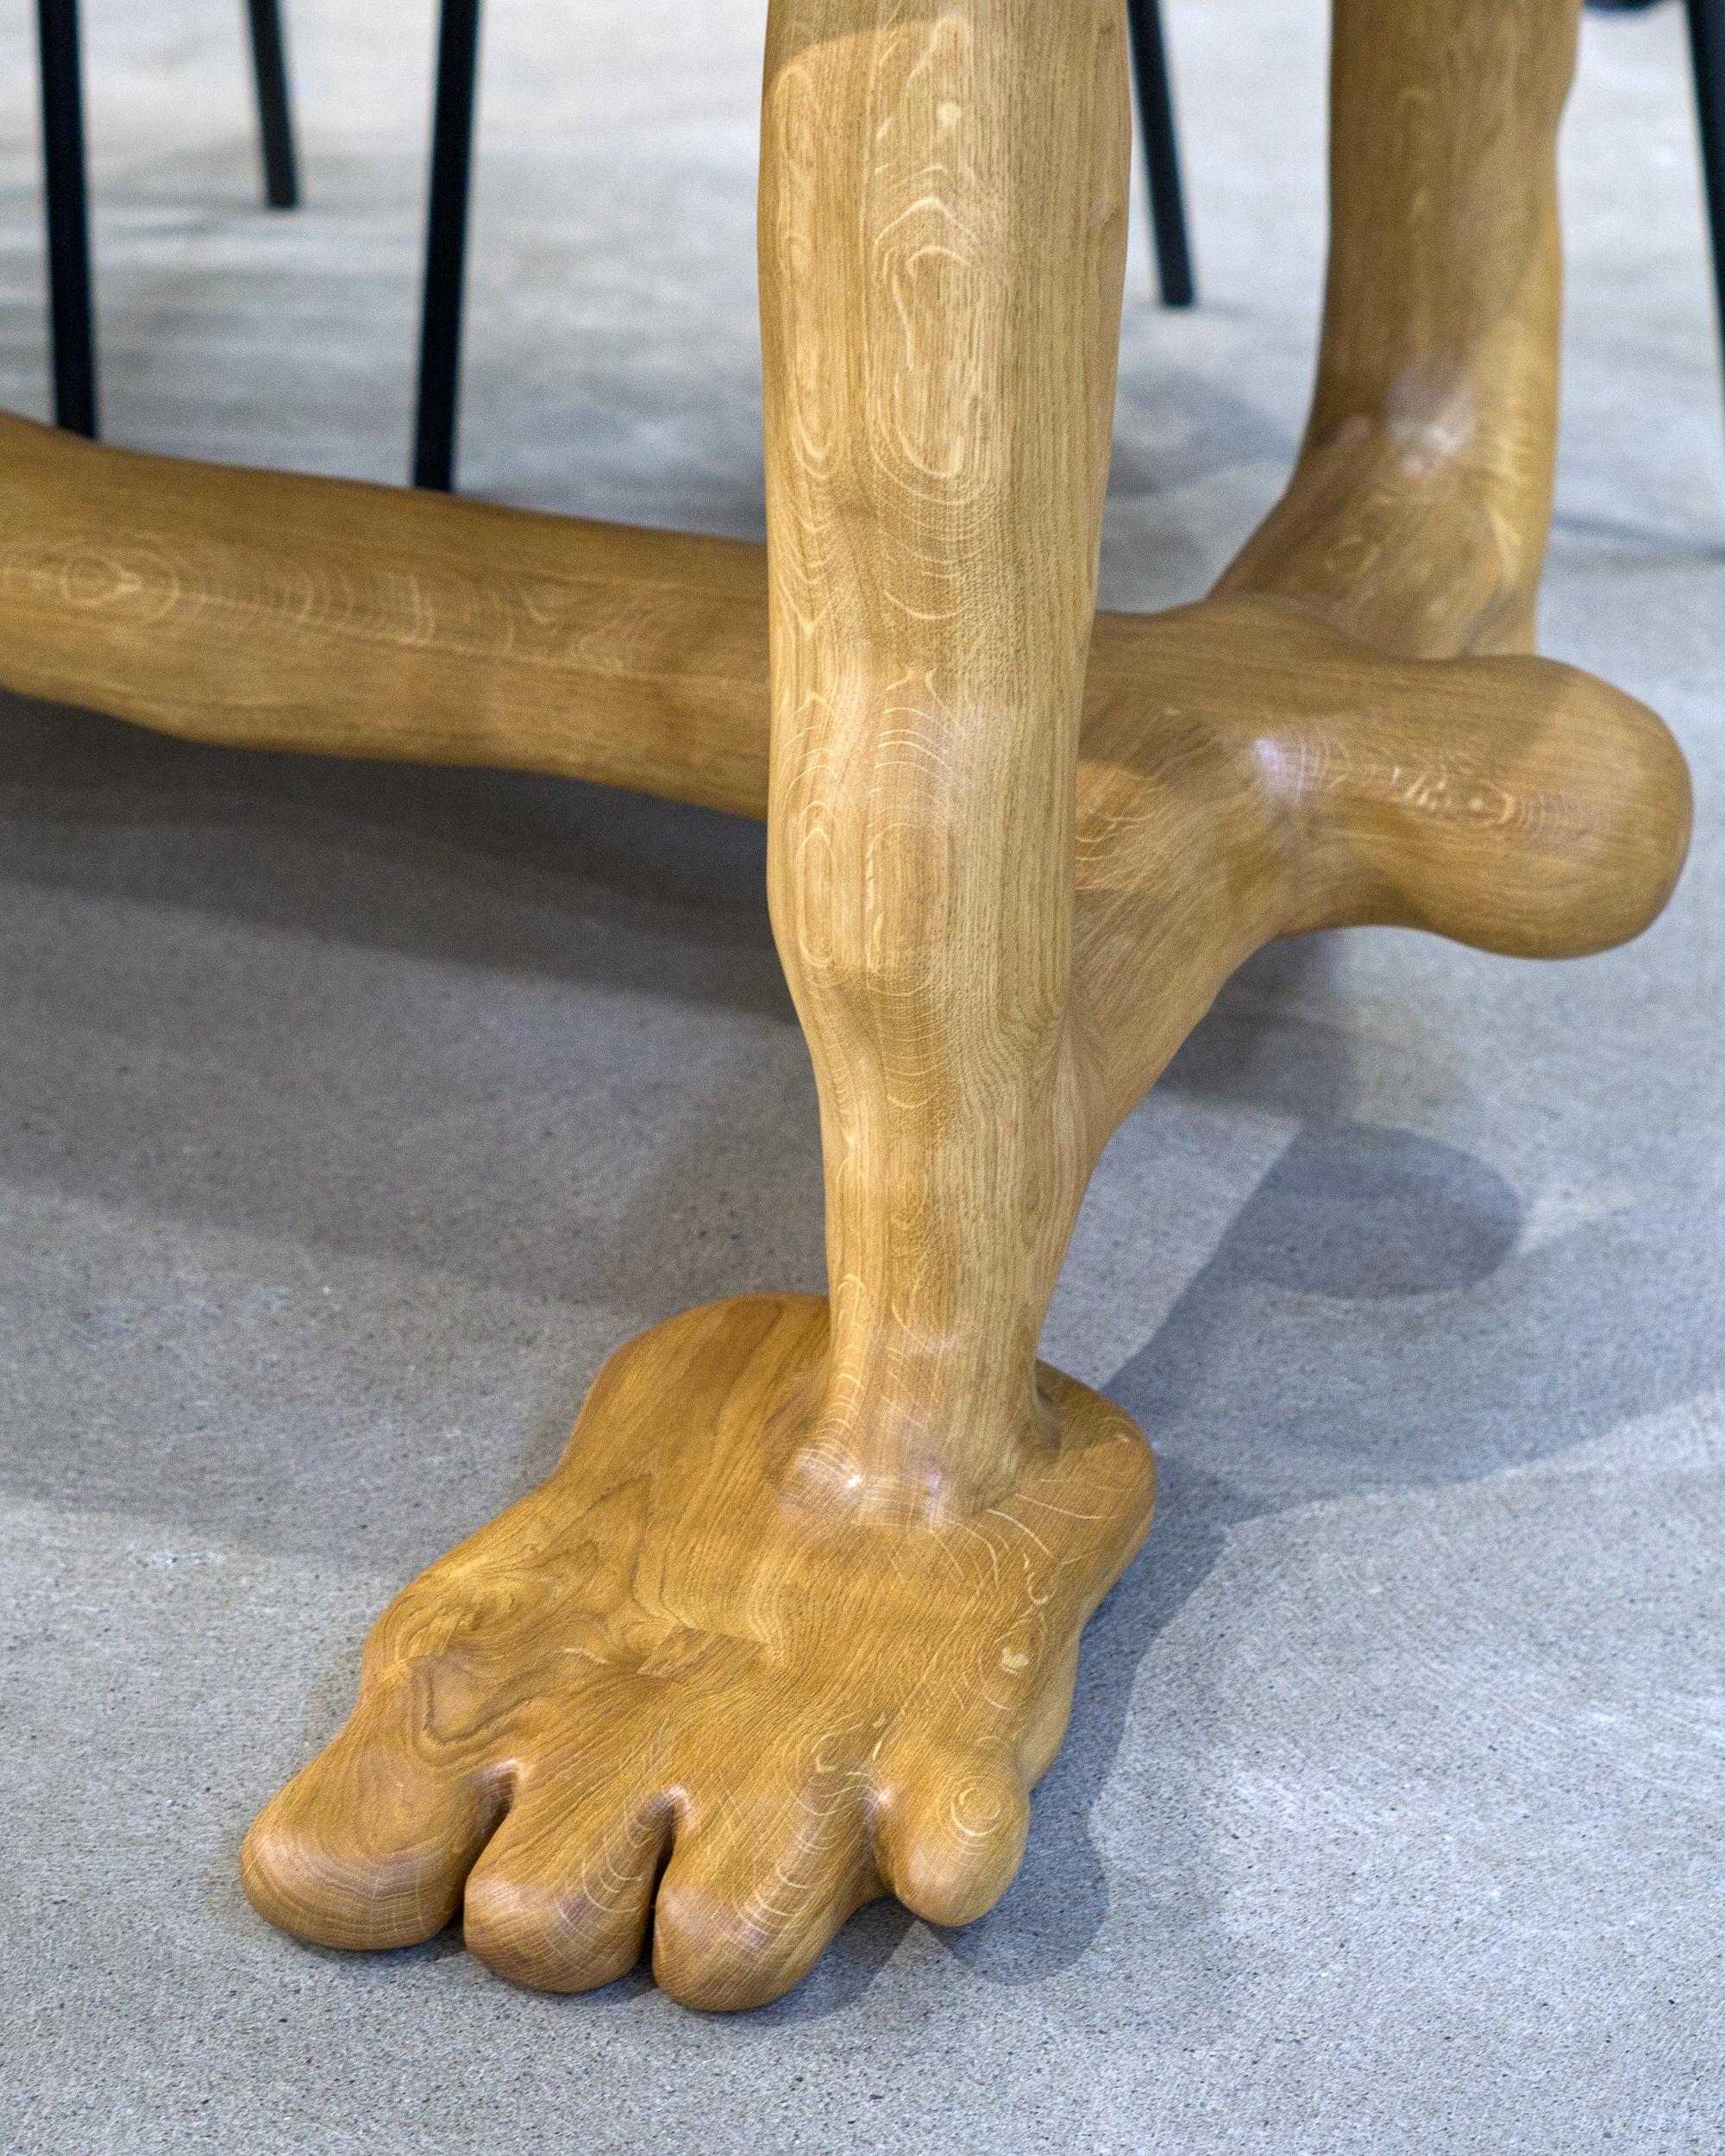 The Leg Dining Table is sculpted using various hand tools, making each piece unique with its own distinctive wood grain. The sculptural table is characterized by its seamless flow, with no sharp edges or corners. It is crafted from a one piece of